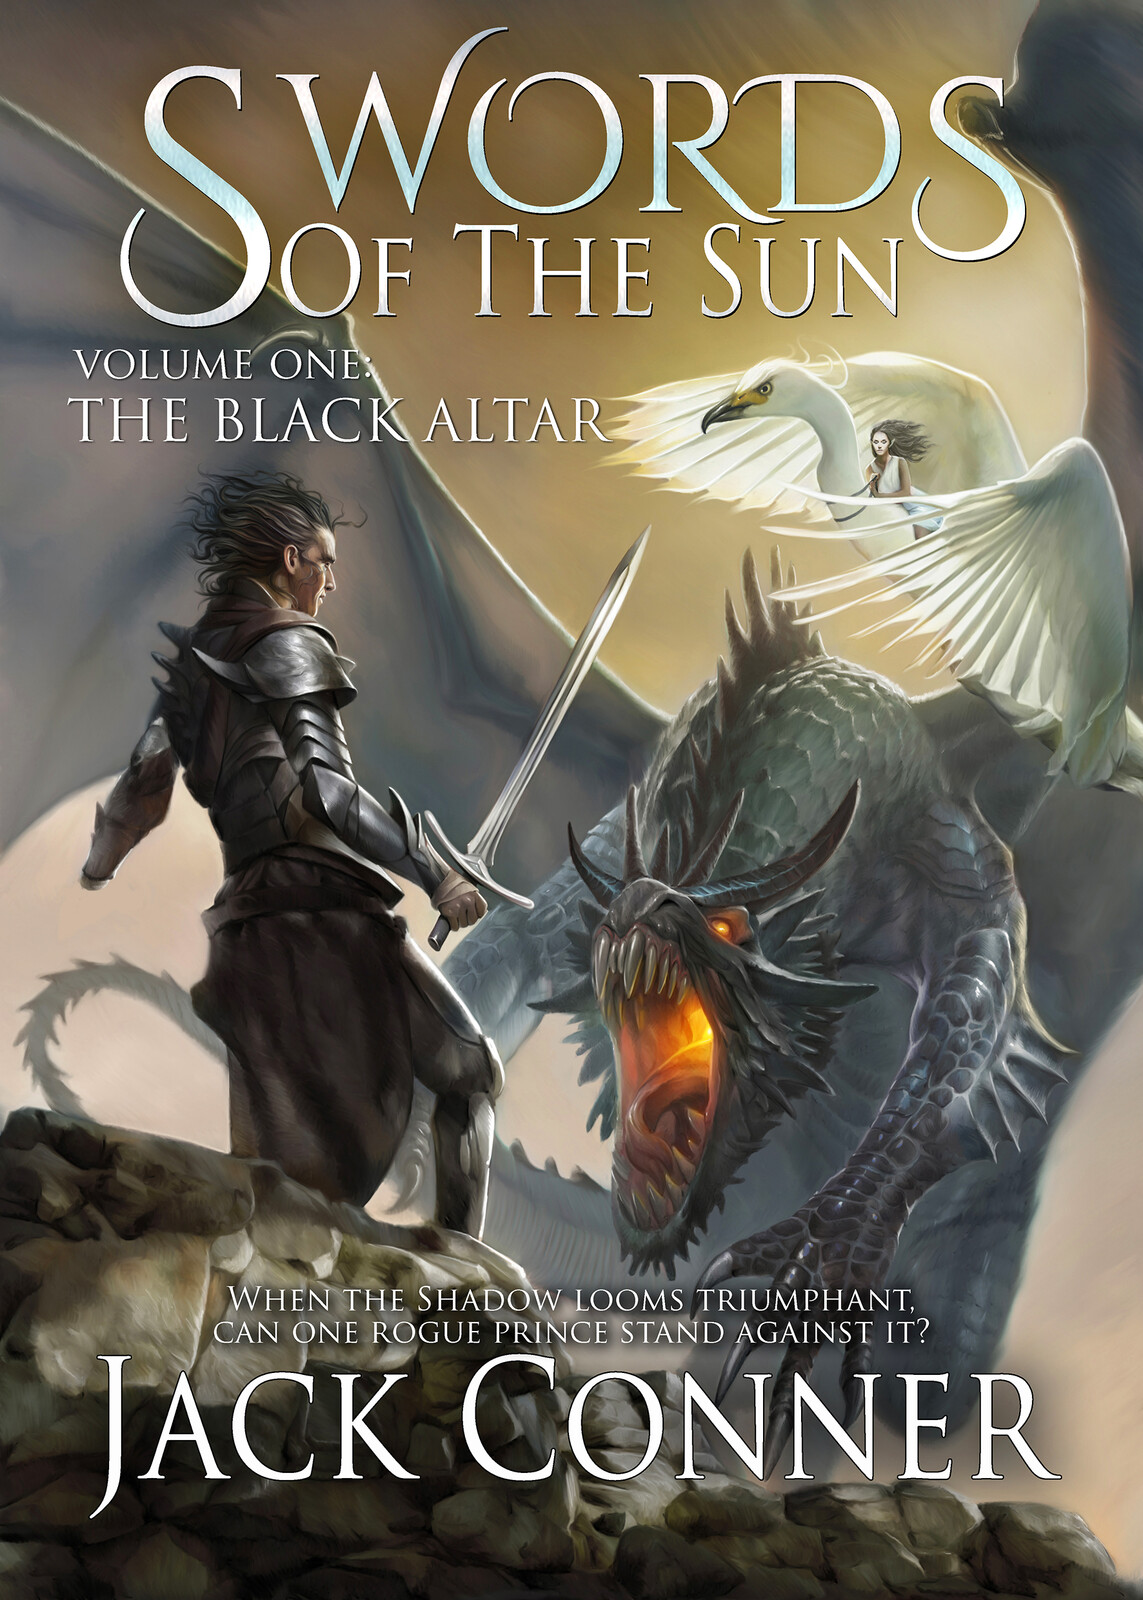 SWORDS OF THE SUN - cover book front with lettering and grafic design